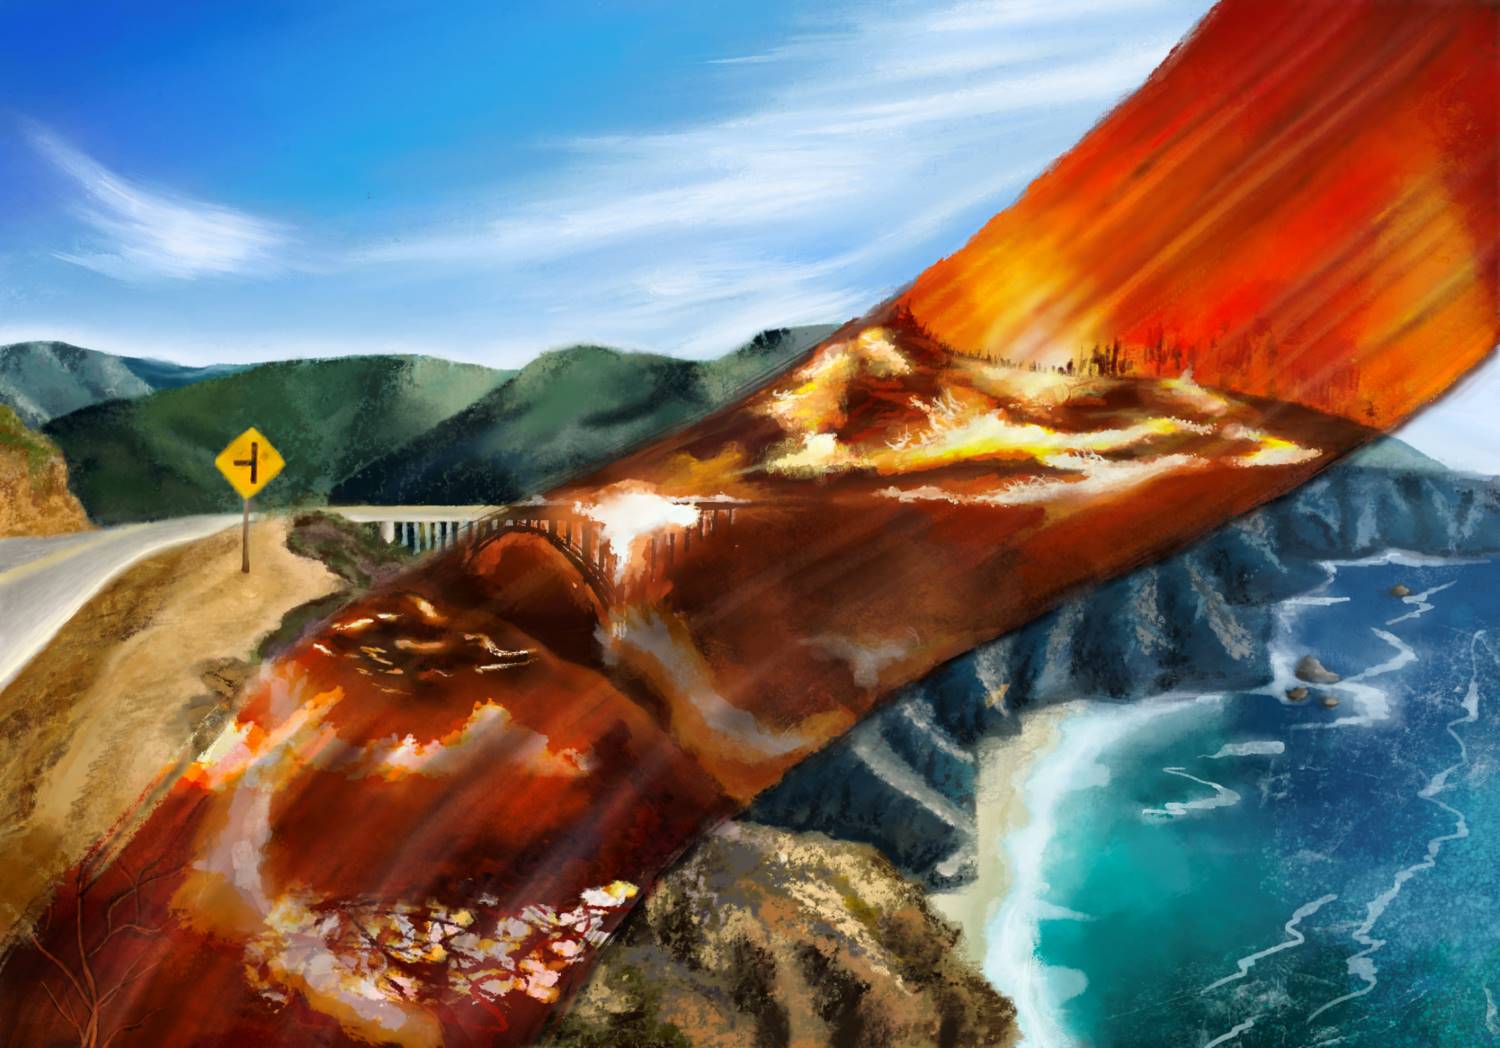 A fantastical scene of Bixby Bridge in Big Sur, with a ribbon running through it showing the same location on fire.